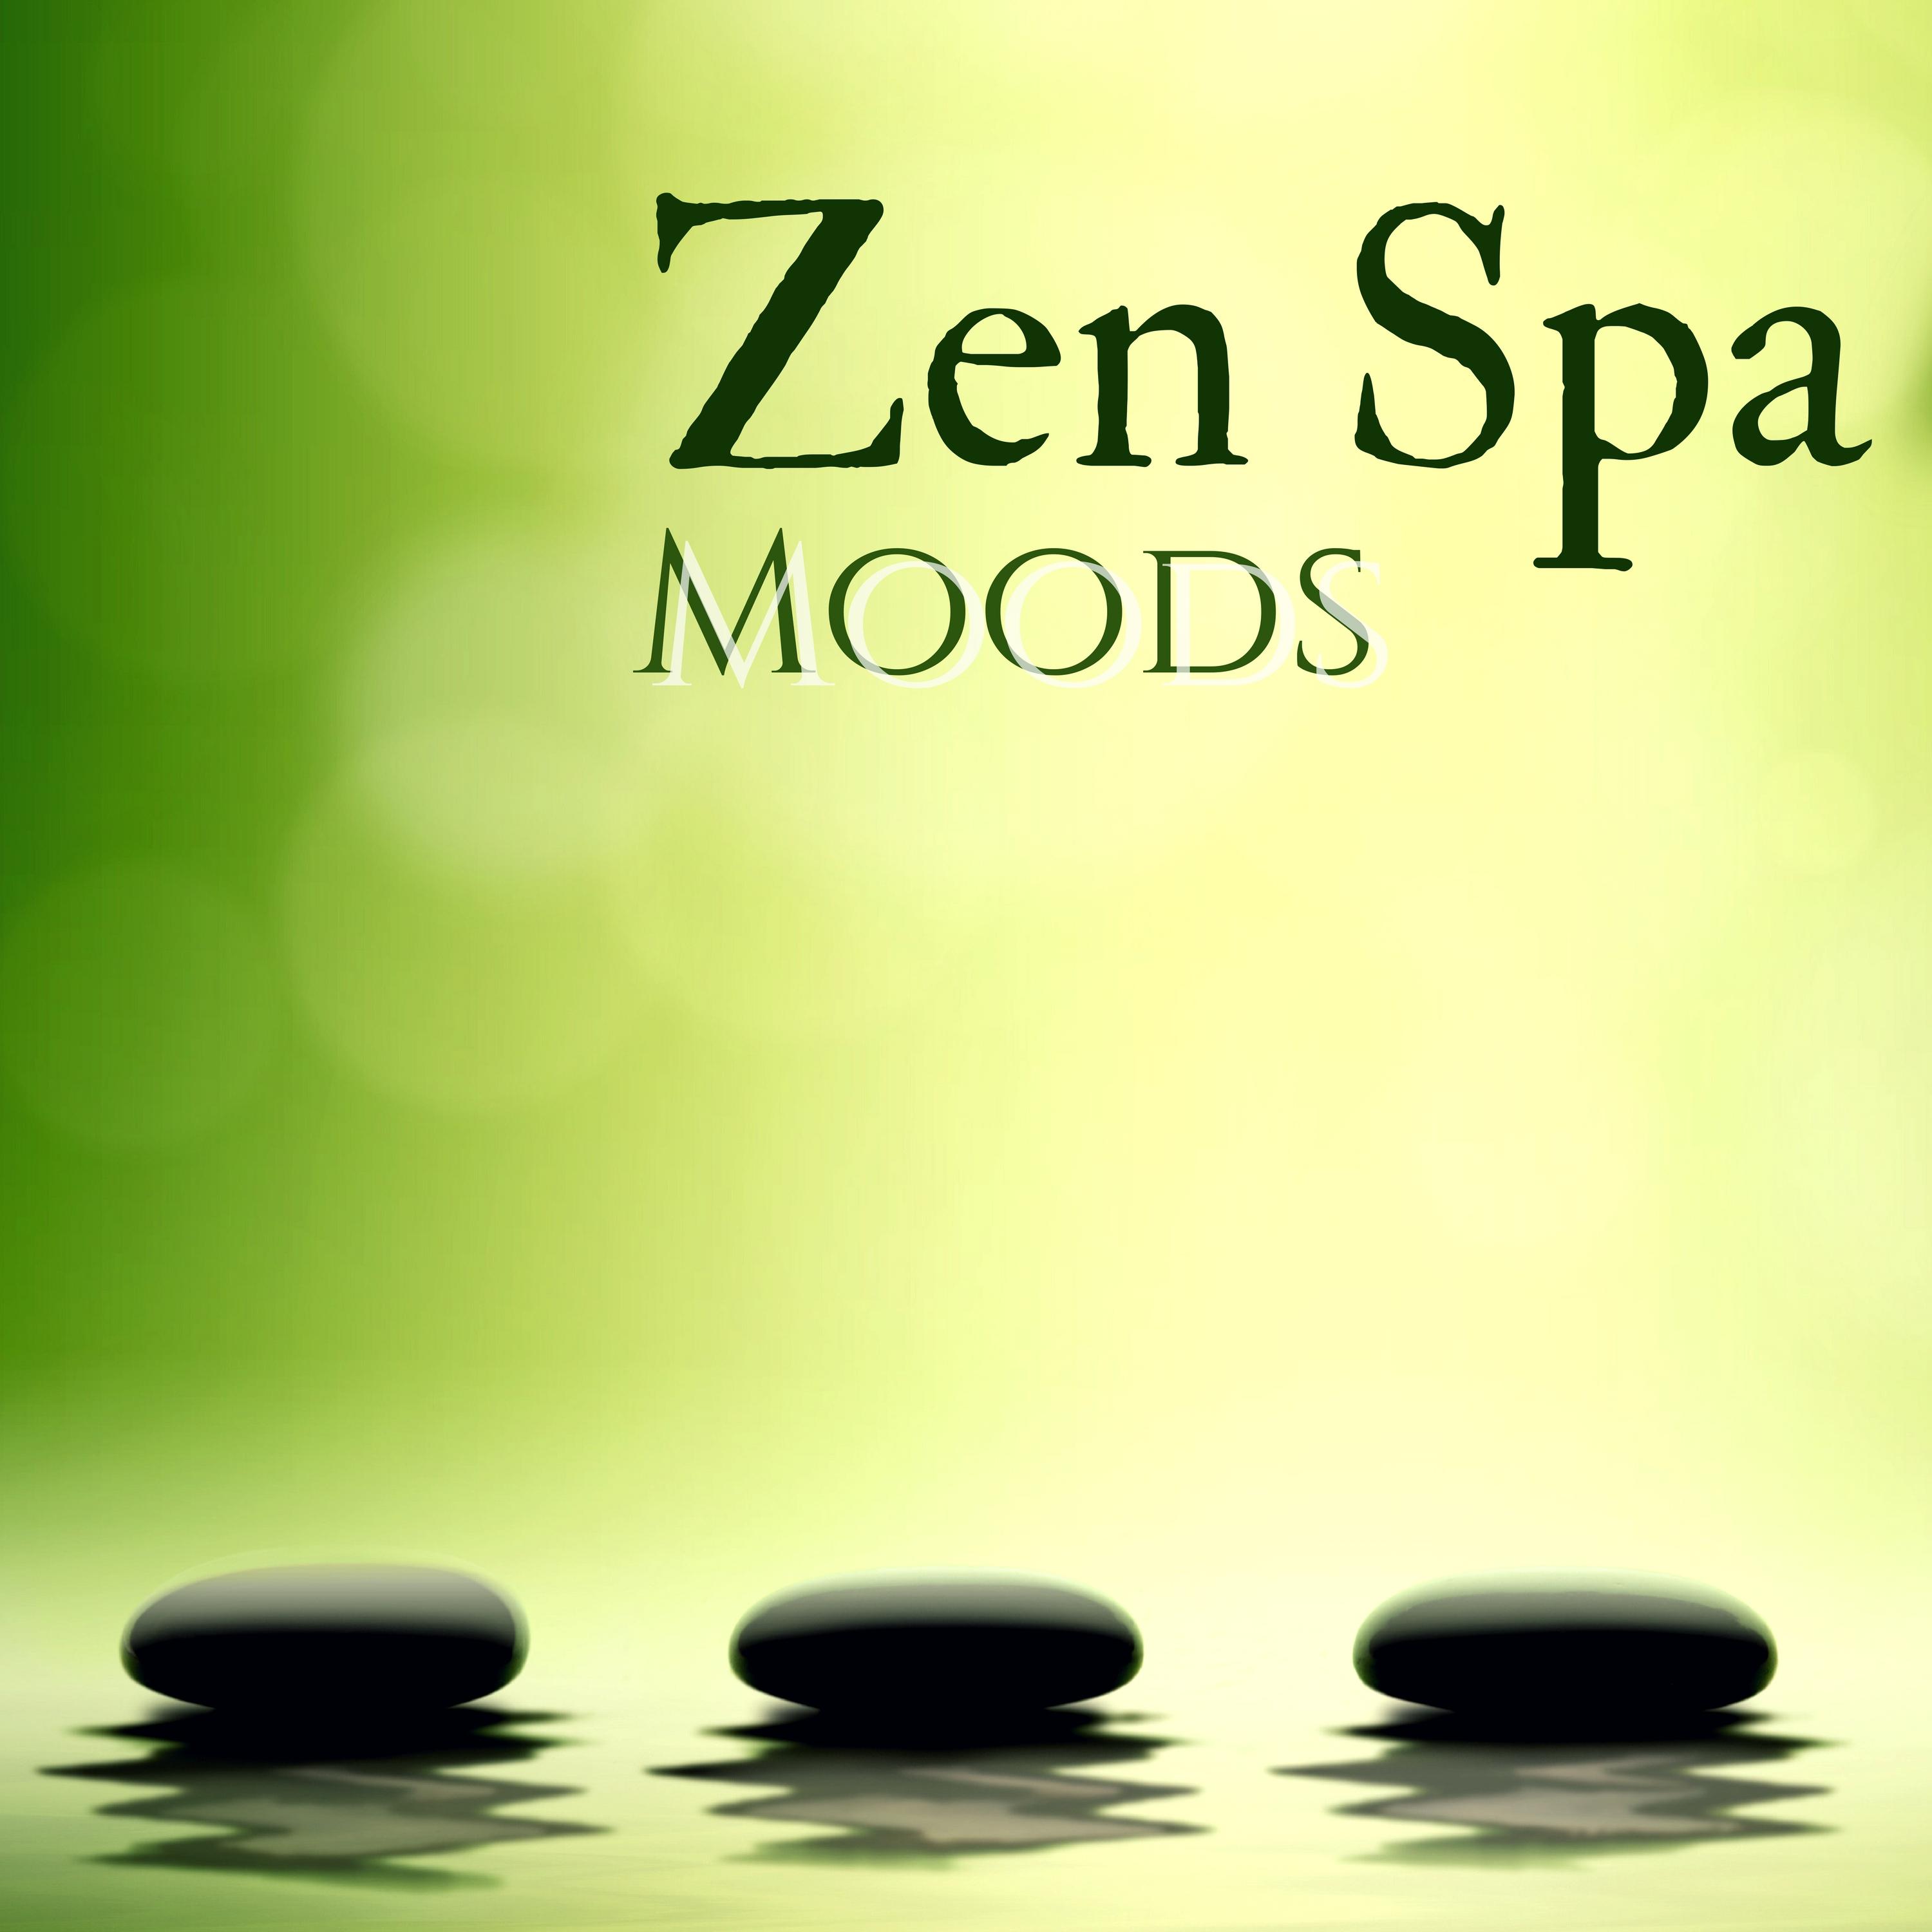 Zen Spa Moods - Gold Wellness Music to Find Balance in Life, Yoga Relaxation Meditation Songs